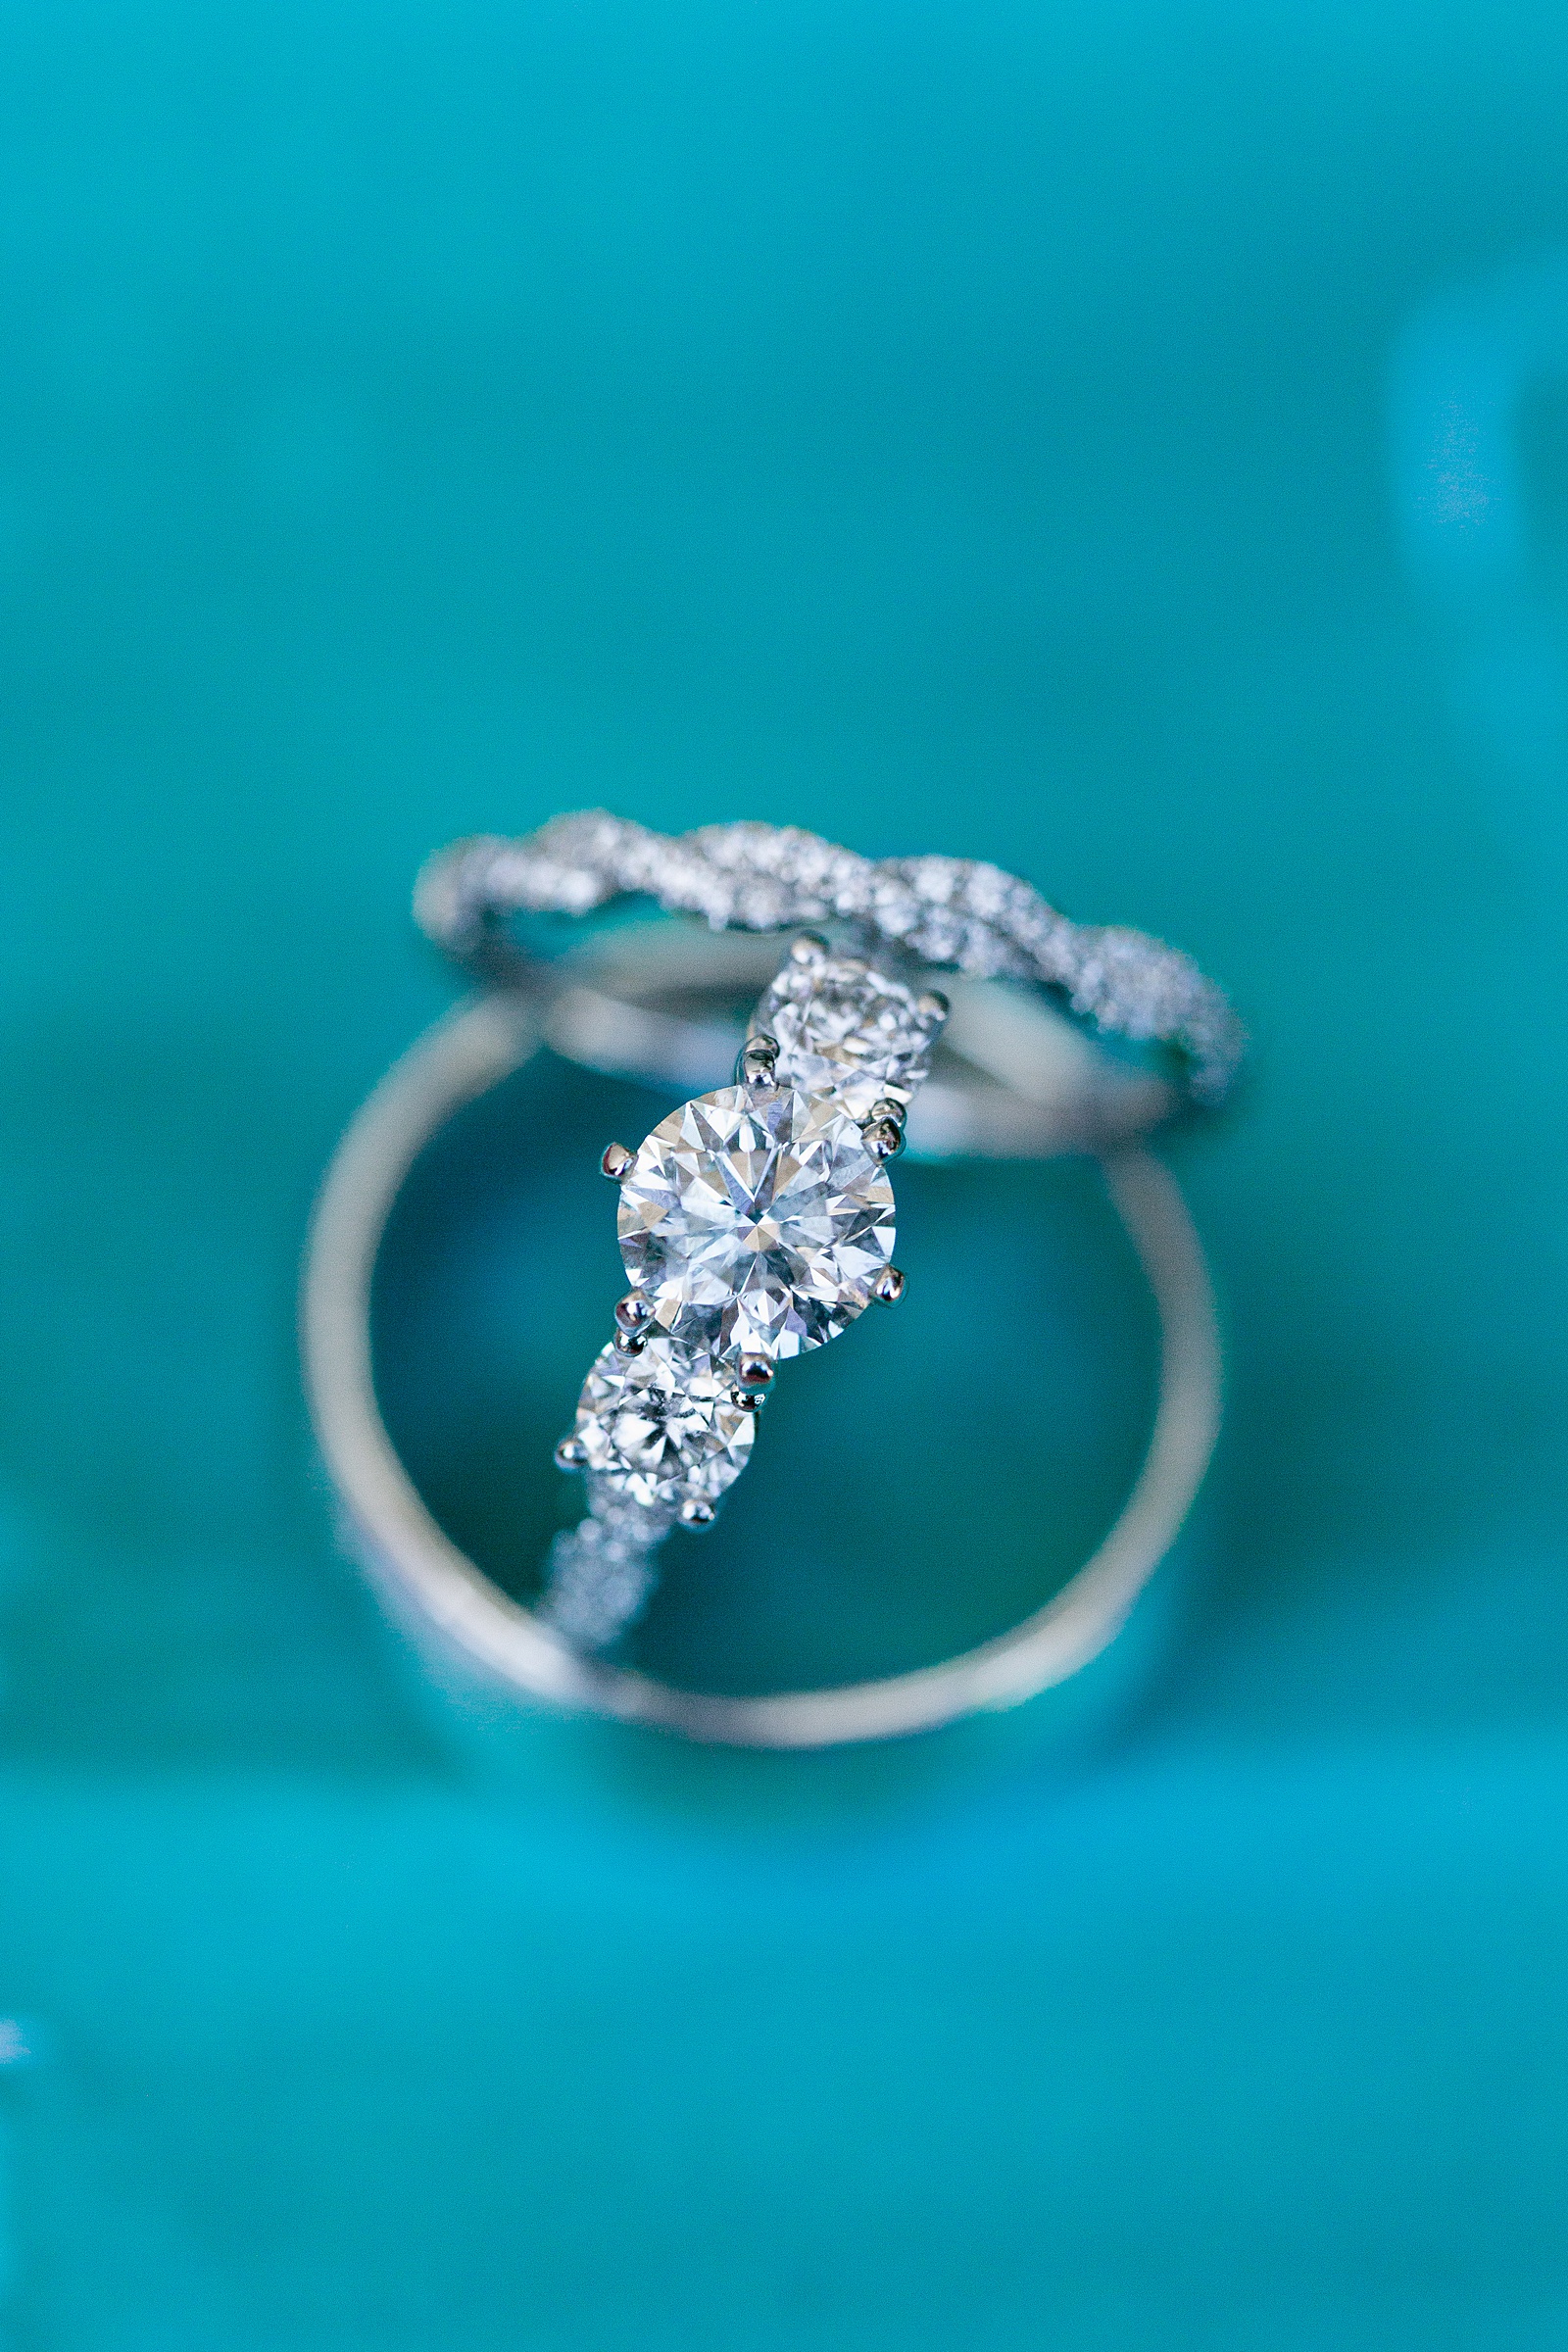 Three diamond white gold engagement ring stacked with his and her wedding bands on a blue backdrop by Arizona wedding photographer PMA Photography.